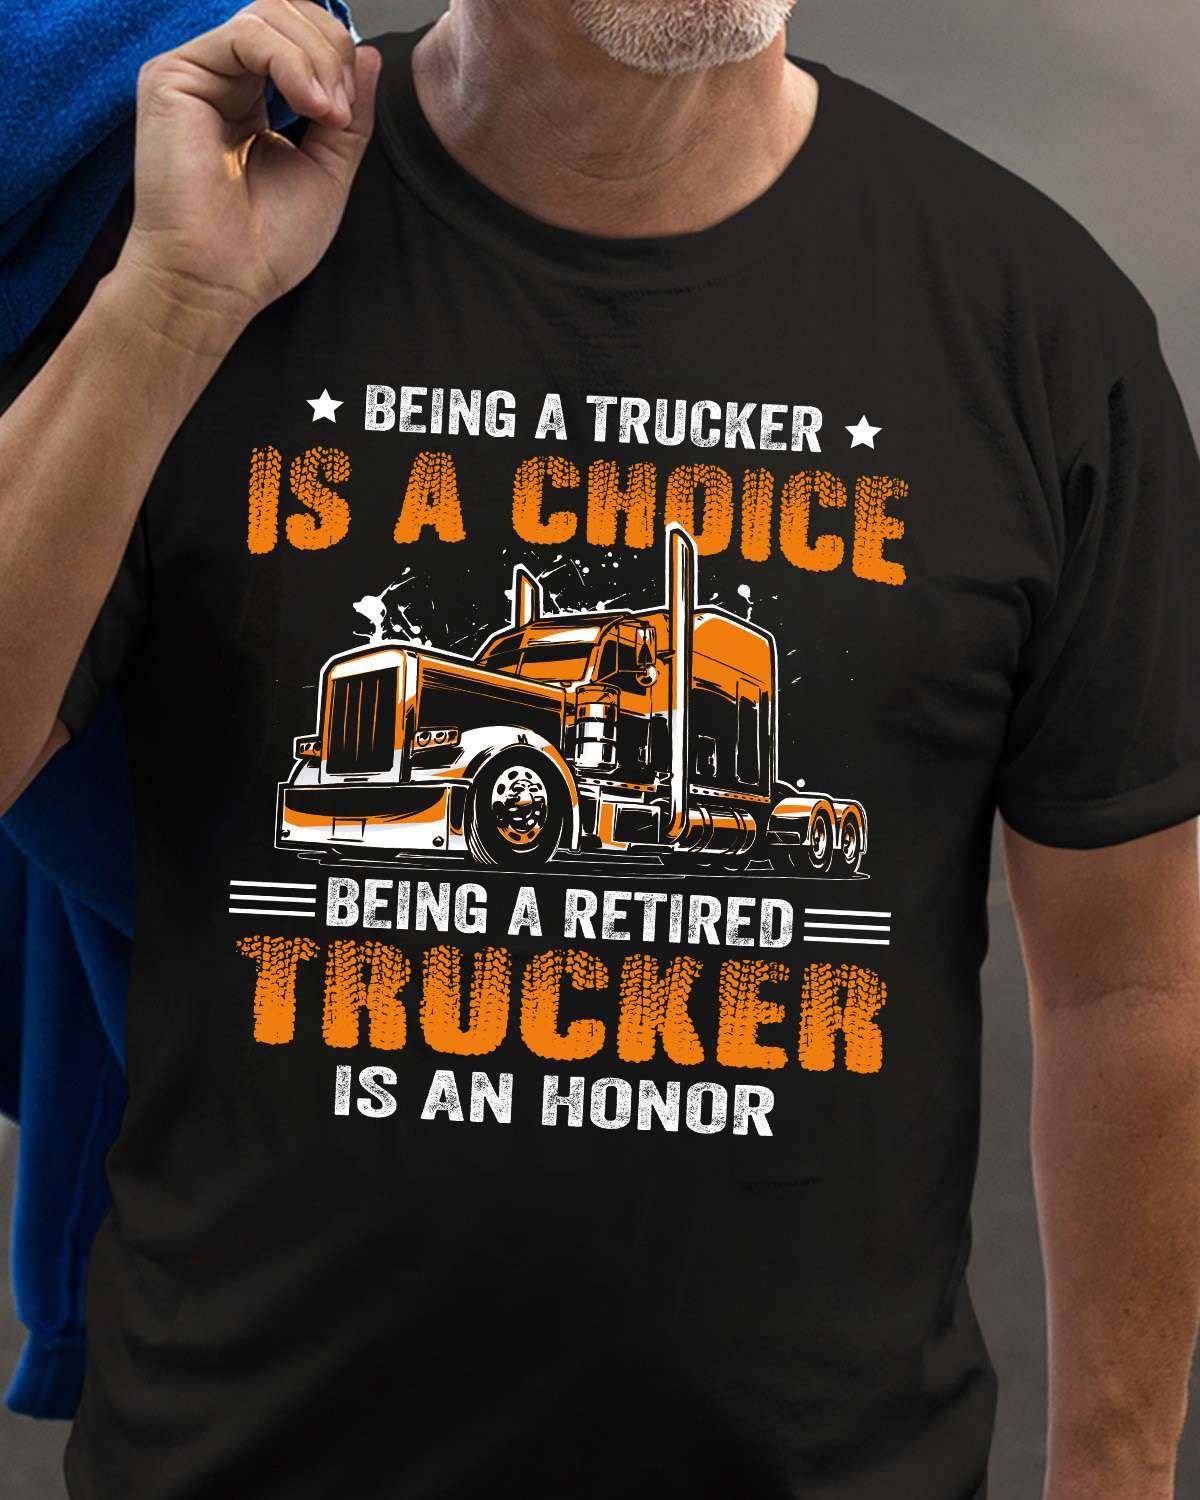 Being a trucker is a choice, being a retired trucker is an honor - Truck driver the job